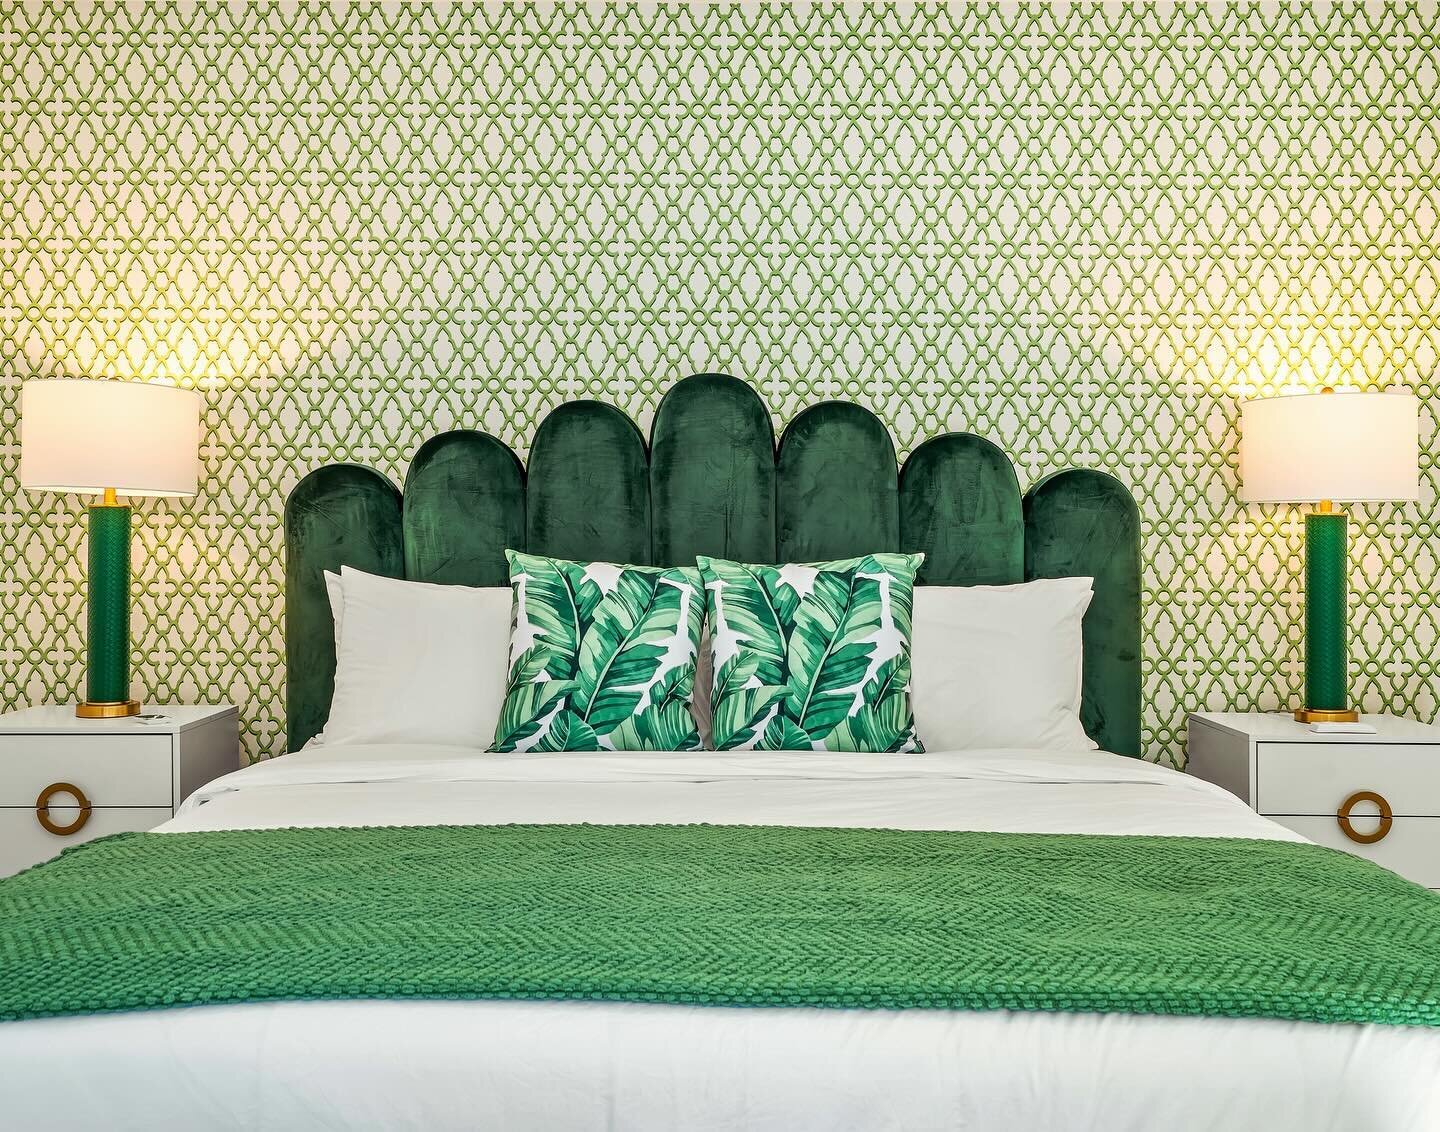 Happy St Patrick&rsquo;s Day from the very green master bedroom at our &lsquo;Rivera Gardens Glam&rsquo; interior design project. 🍀🍀🍀
See the rest at desertsociety.net 🙌🏼